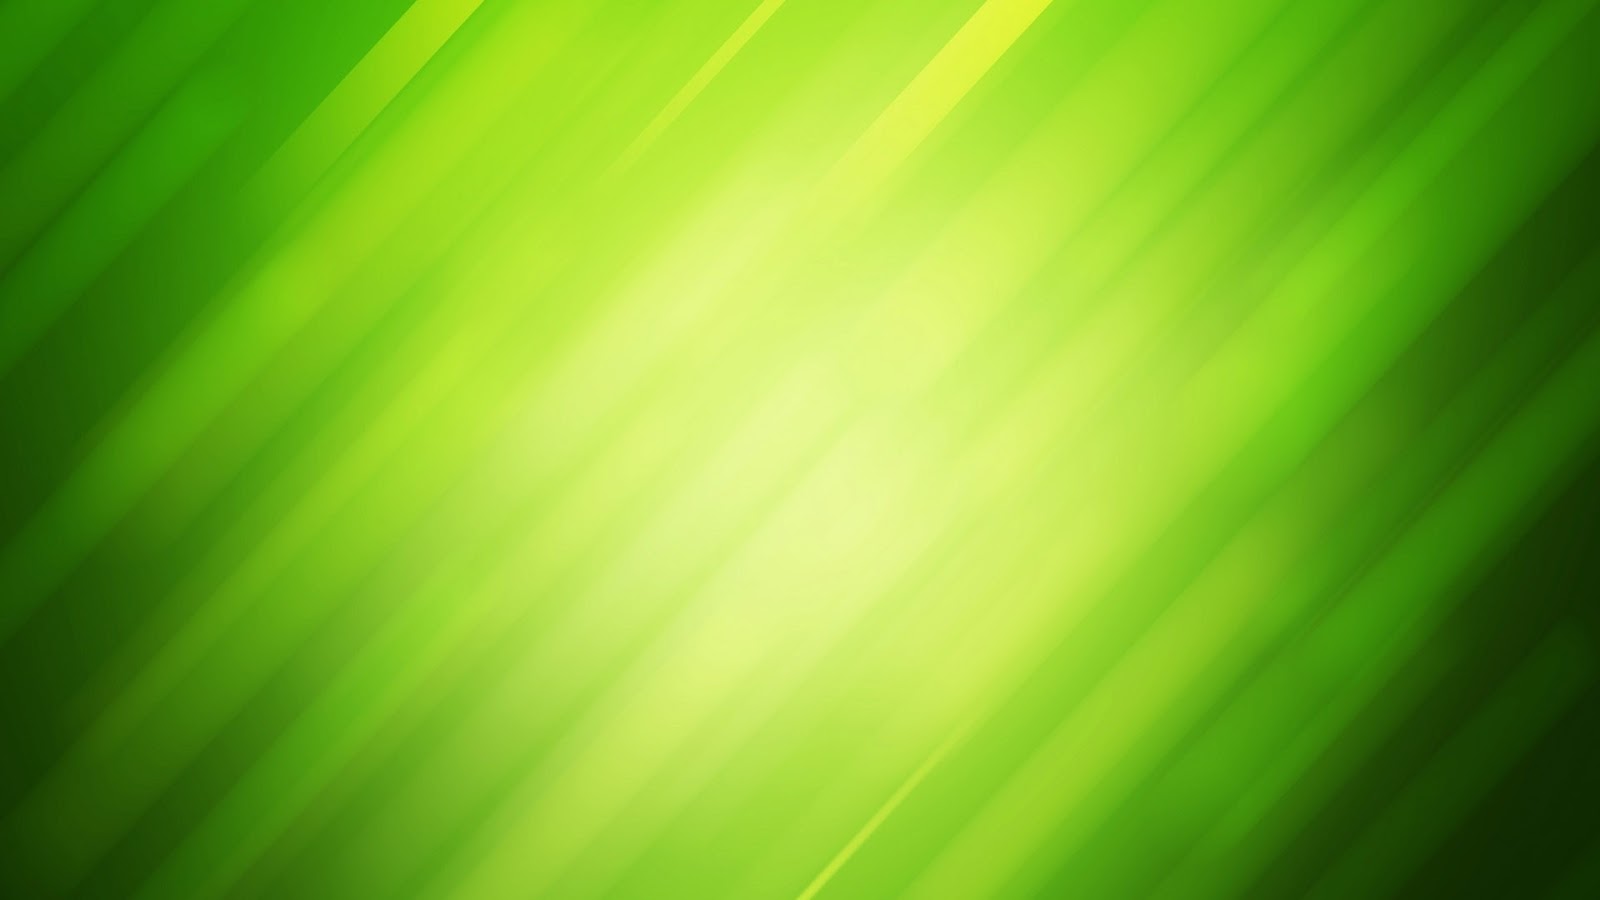 Free download background hijau background kindle pics x for your desktop mobile tablet explore cool green abstract wallpapers cool abstract backgrounds cool abstract background abstract green wallpaper